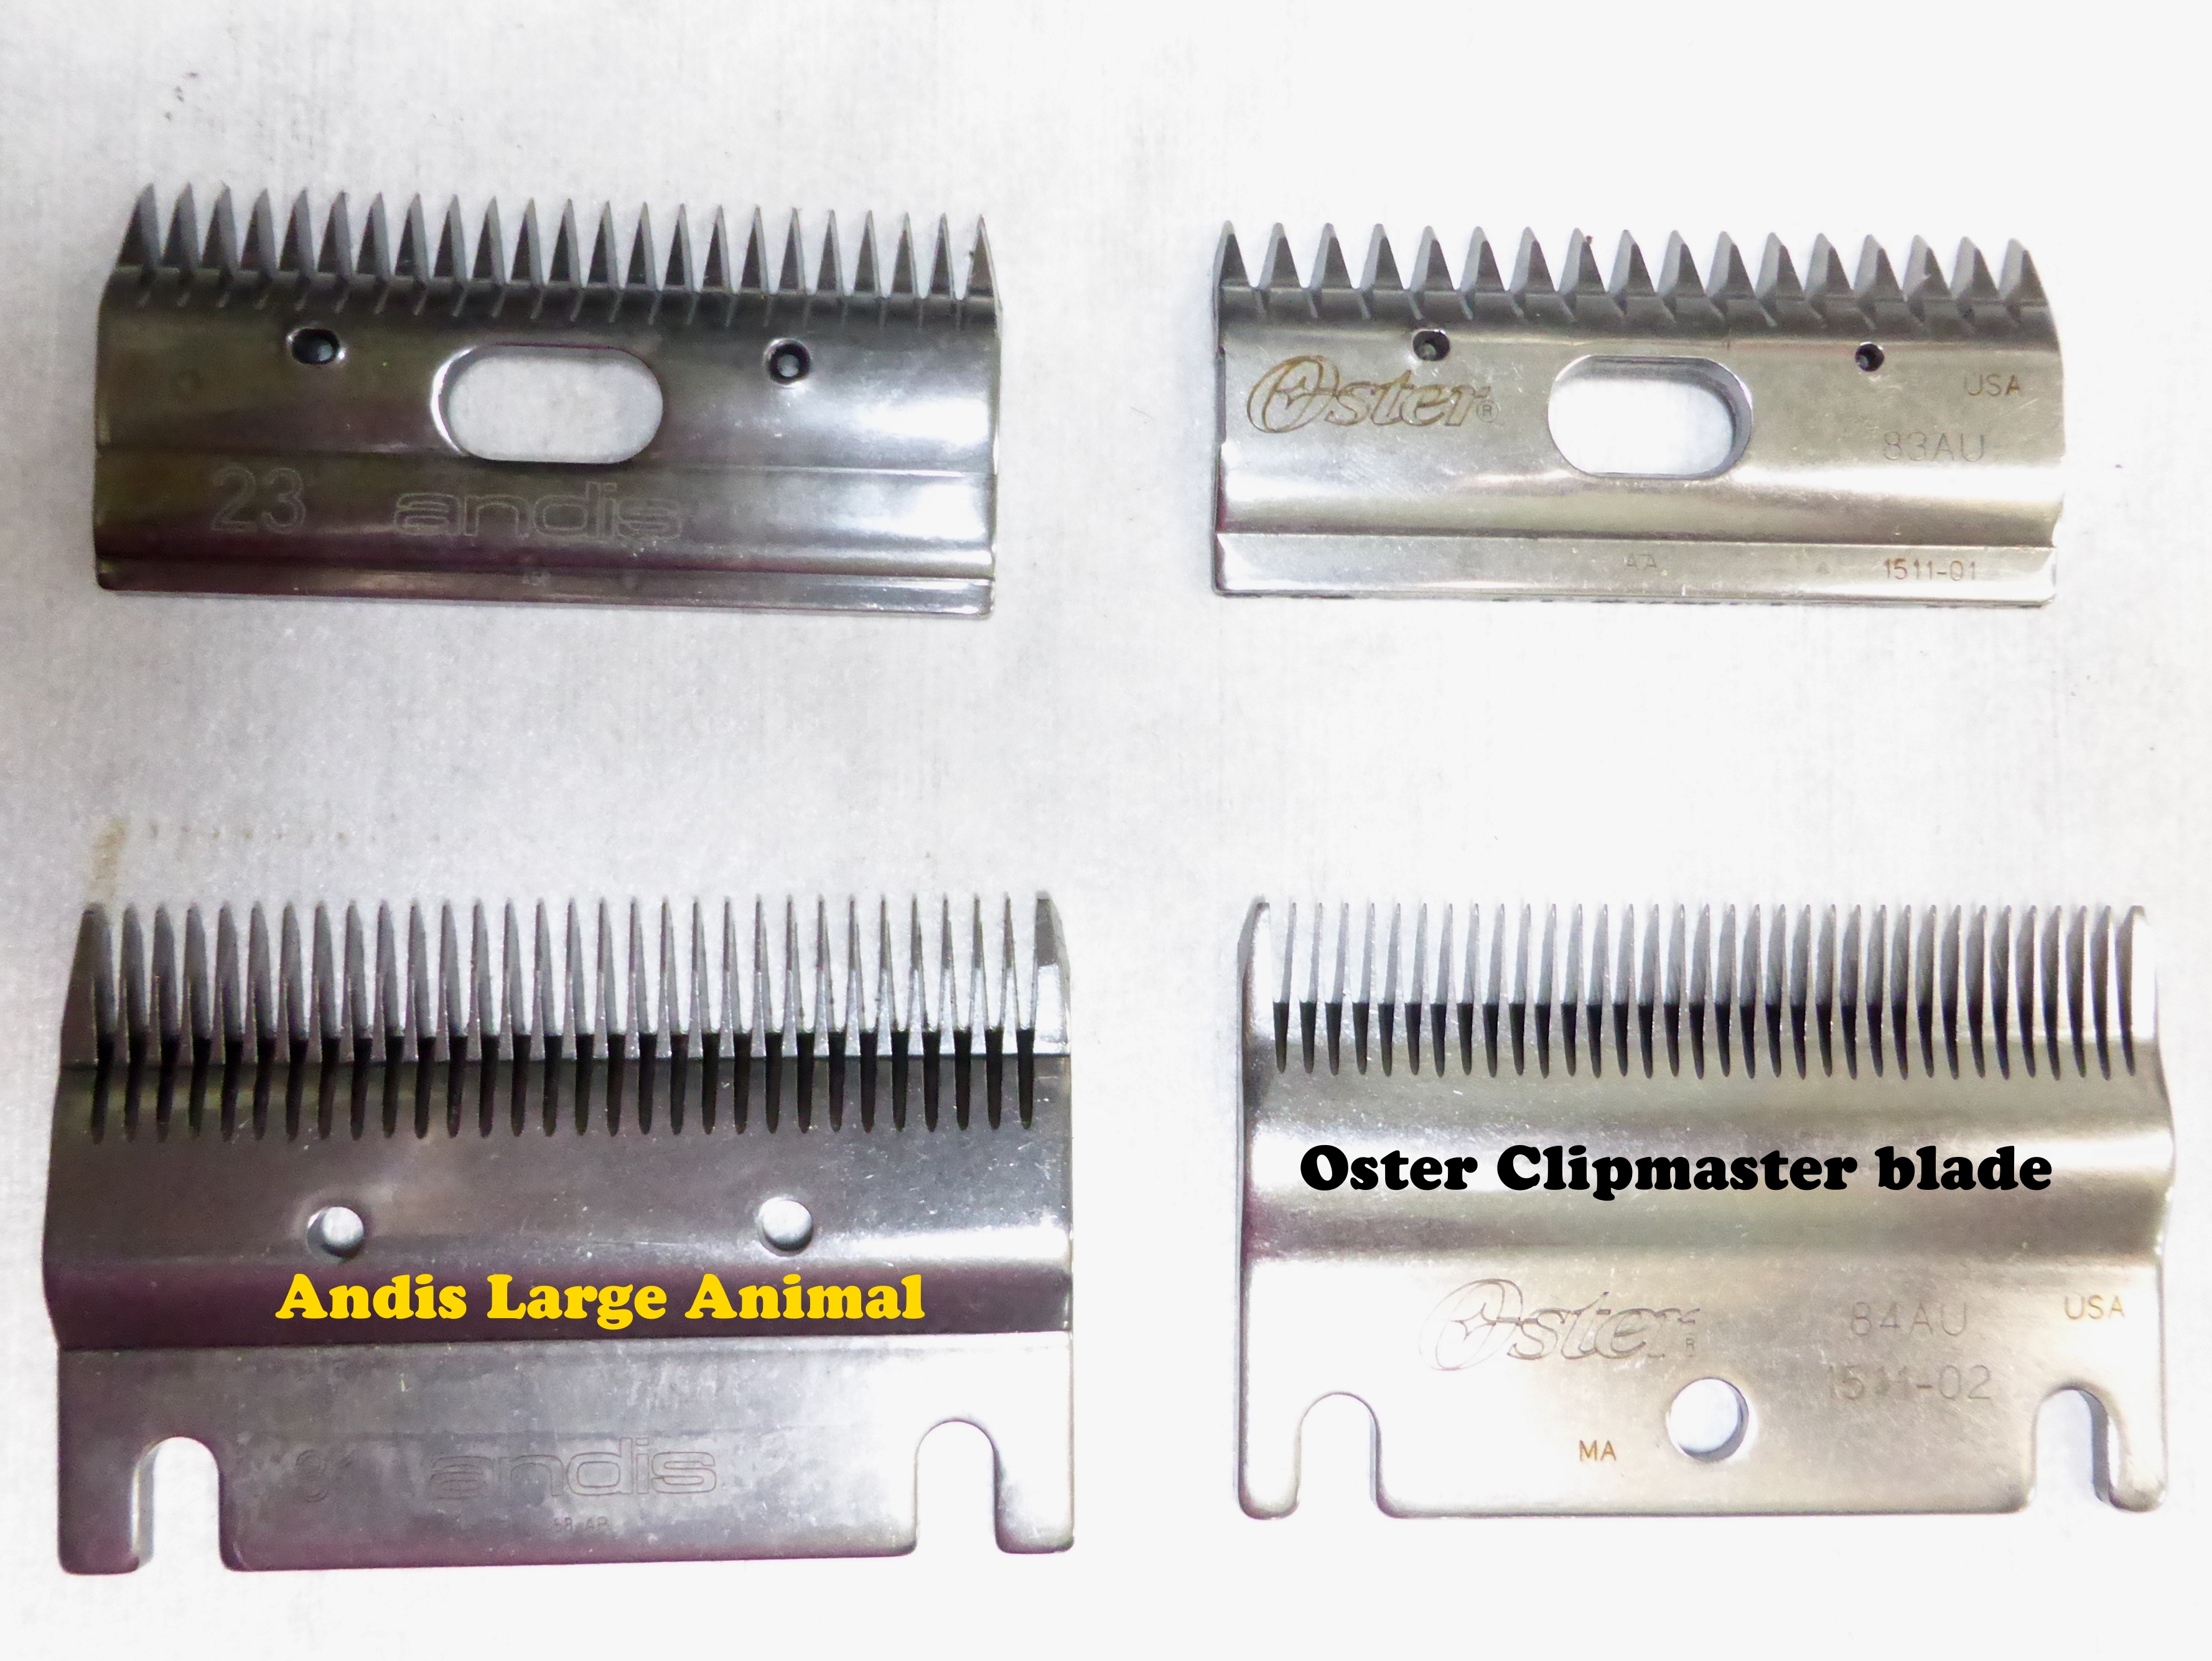 andis_and_oster_large_blades.jpg